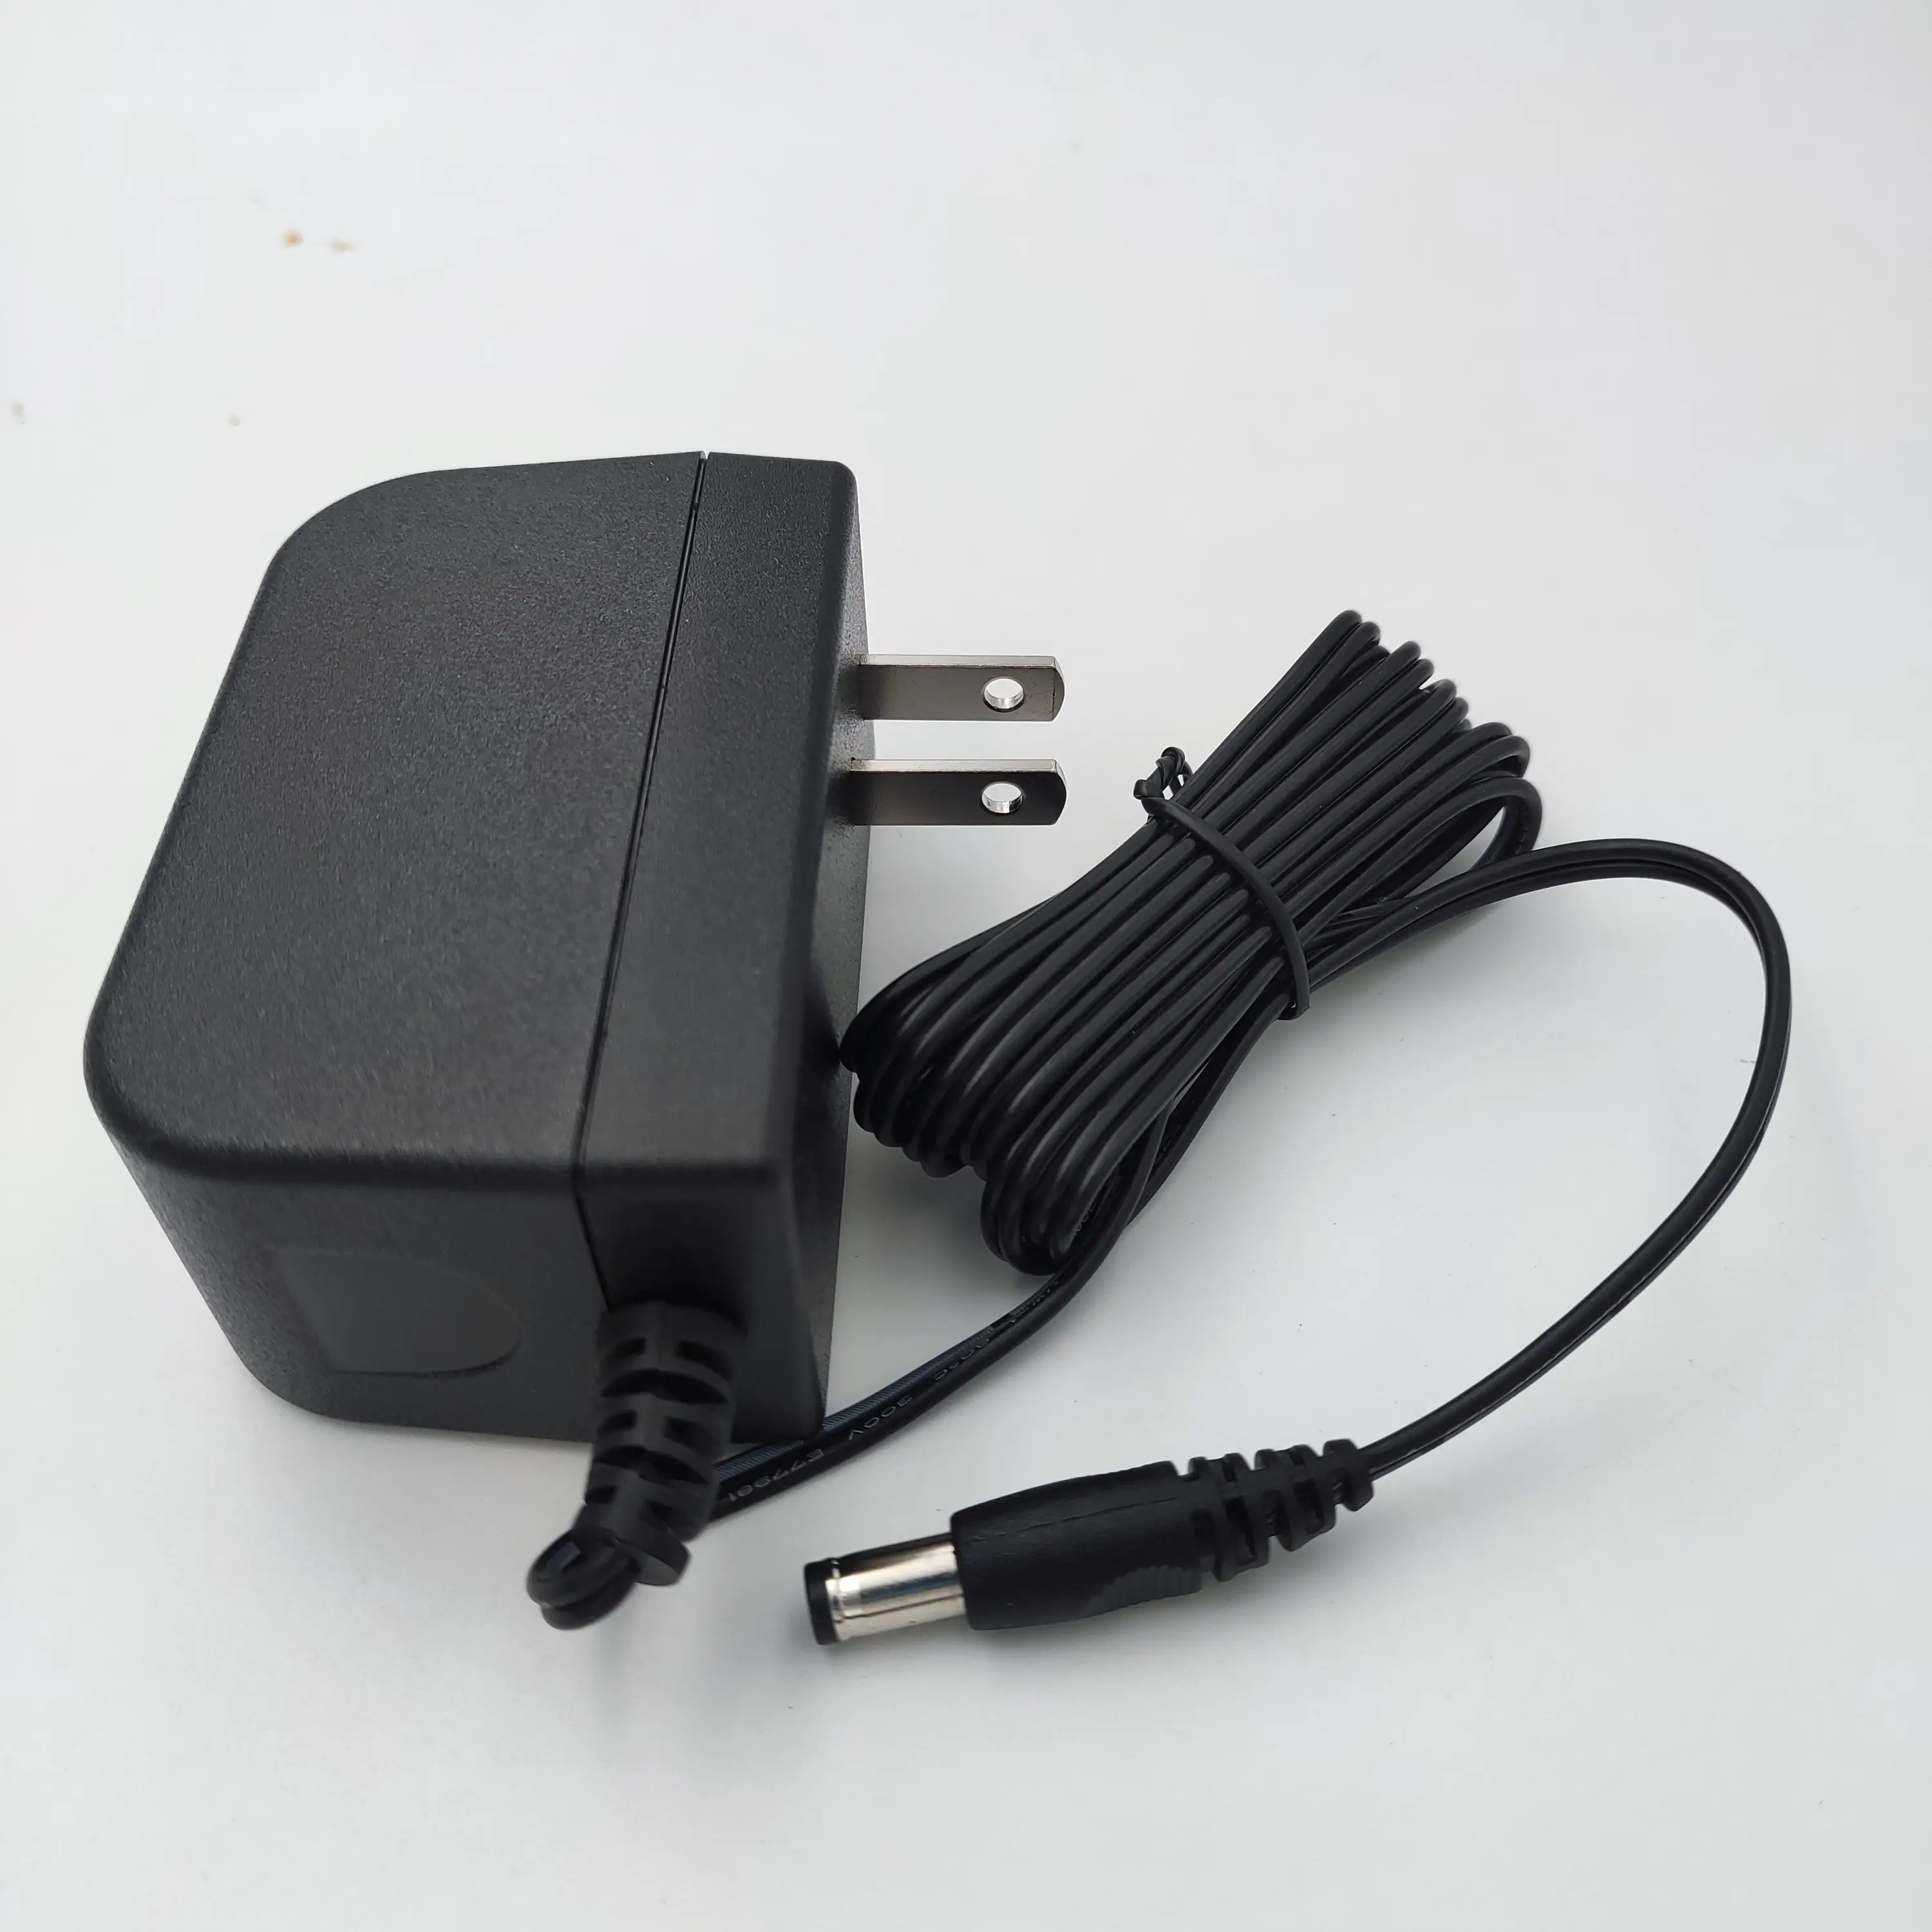 24V 1A Power Supply Adapter For Sporting Equipments And Digital Appliances